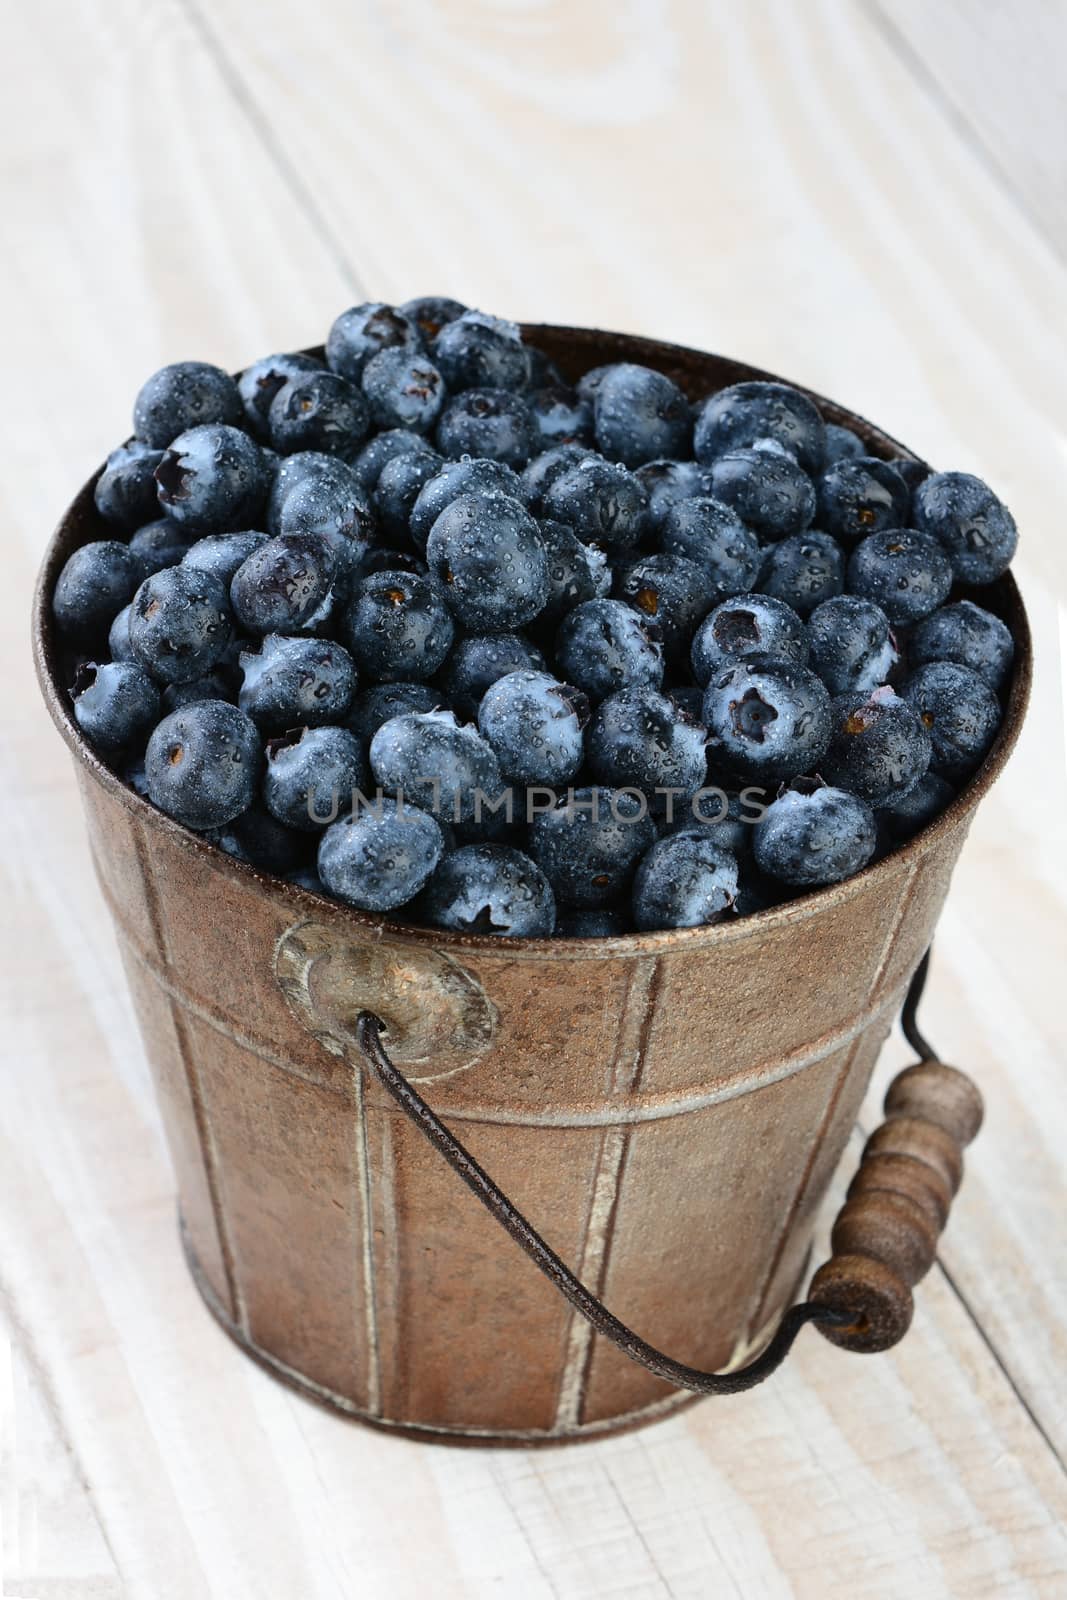 Bucket of Blueberries on Rustic Table by sCukrov